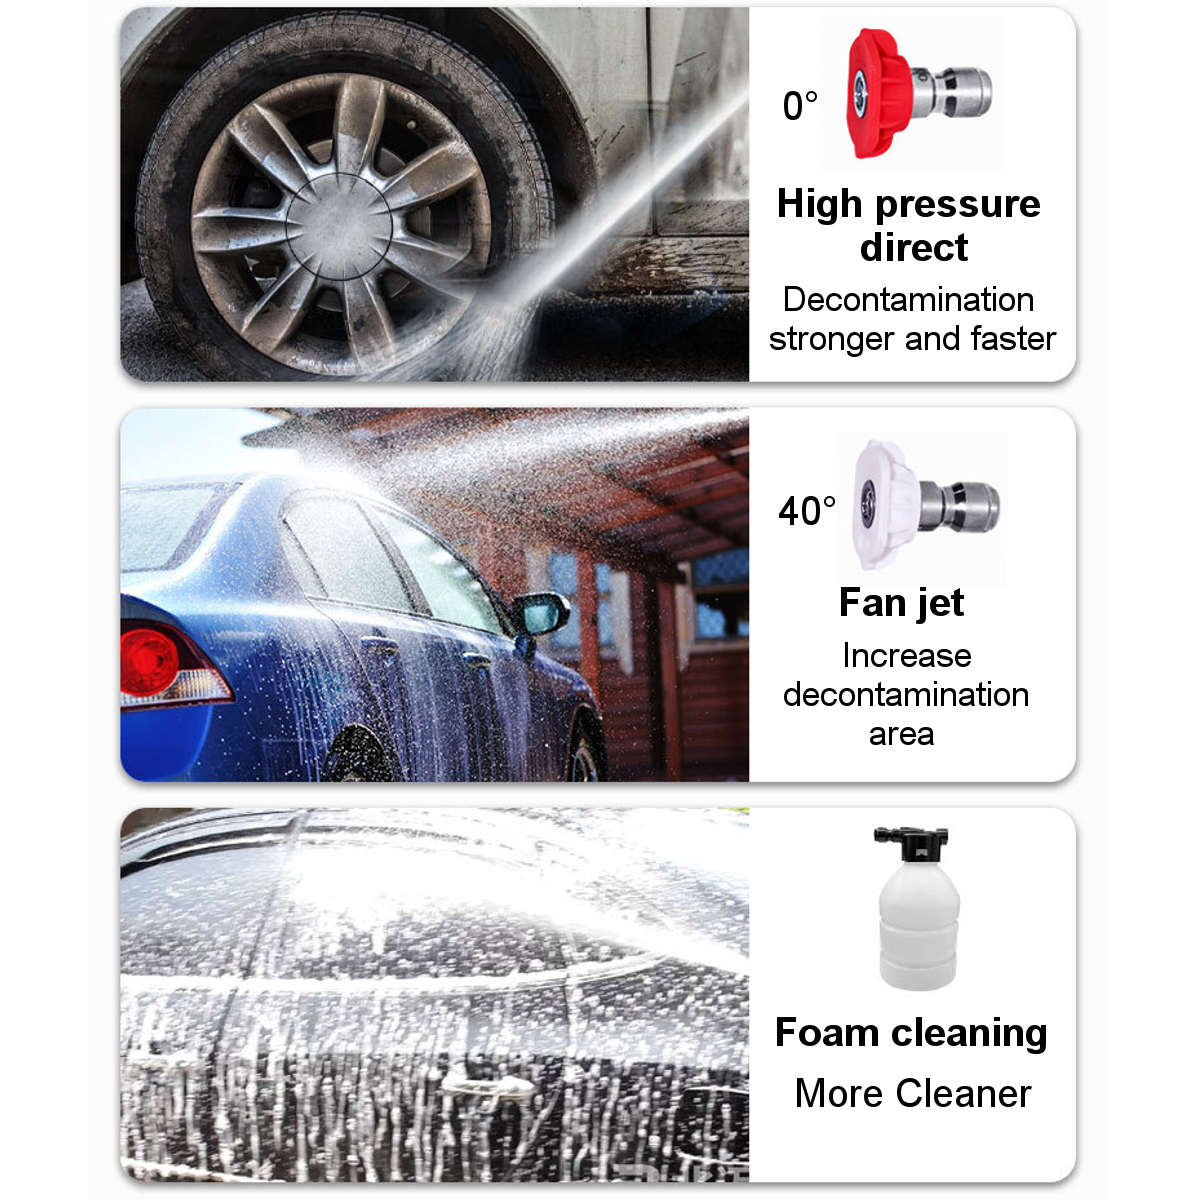 288VF-Cordless-Electric-High-Pressure-Washer-Car-Cleaner-Water-Spray-Guns-Water-Hose-Cleaning-Washin-1869047-6